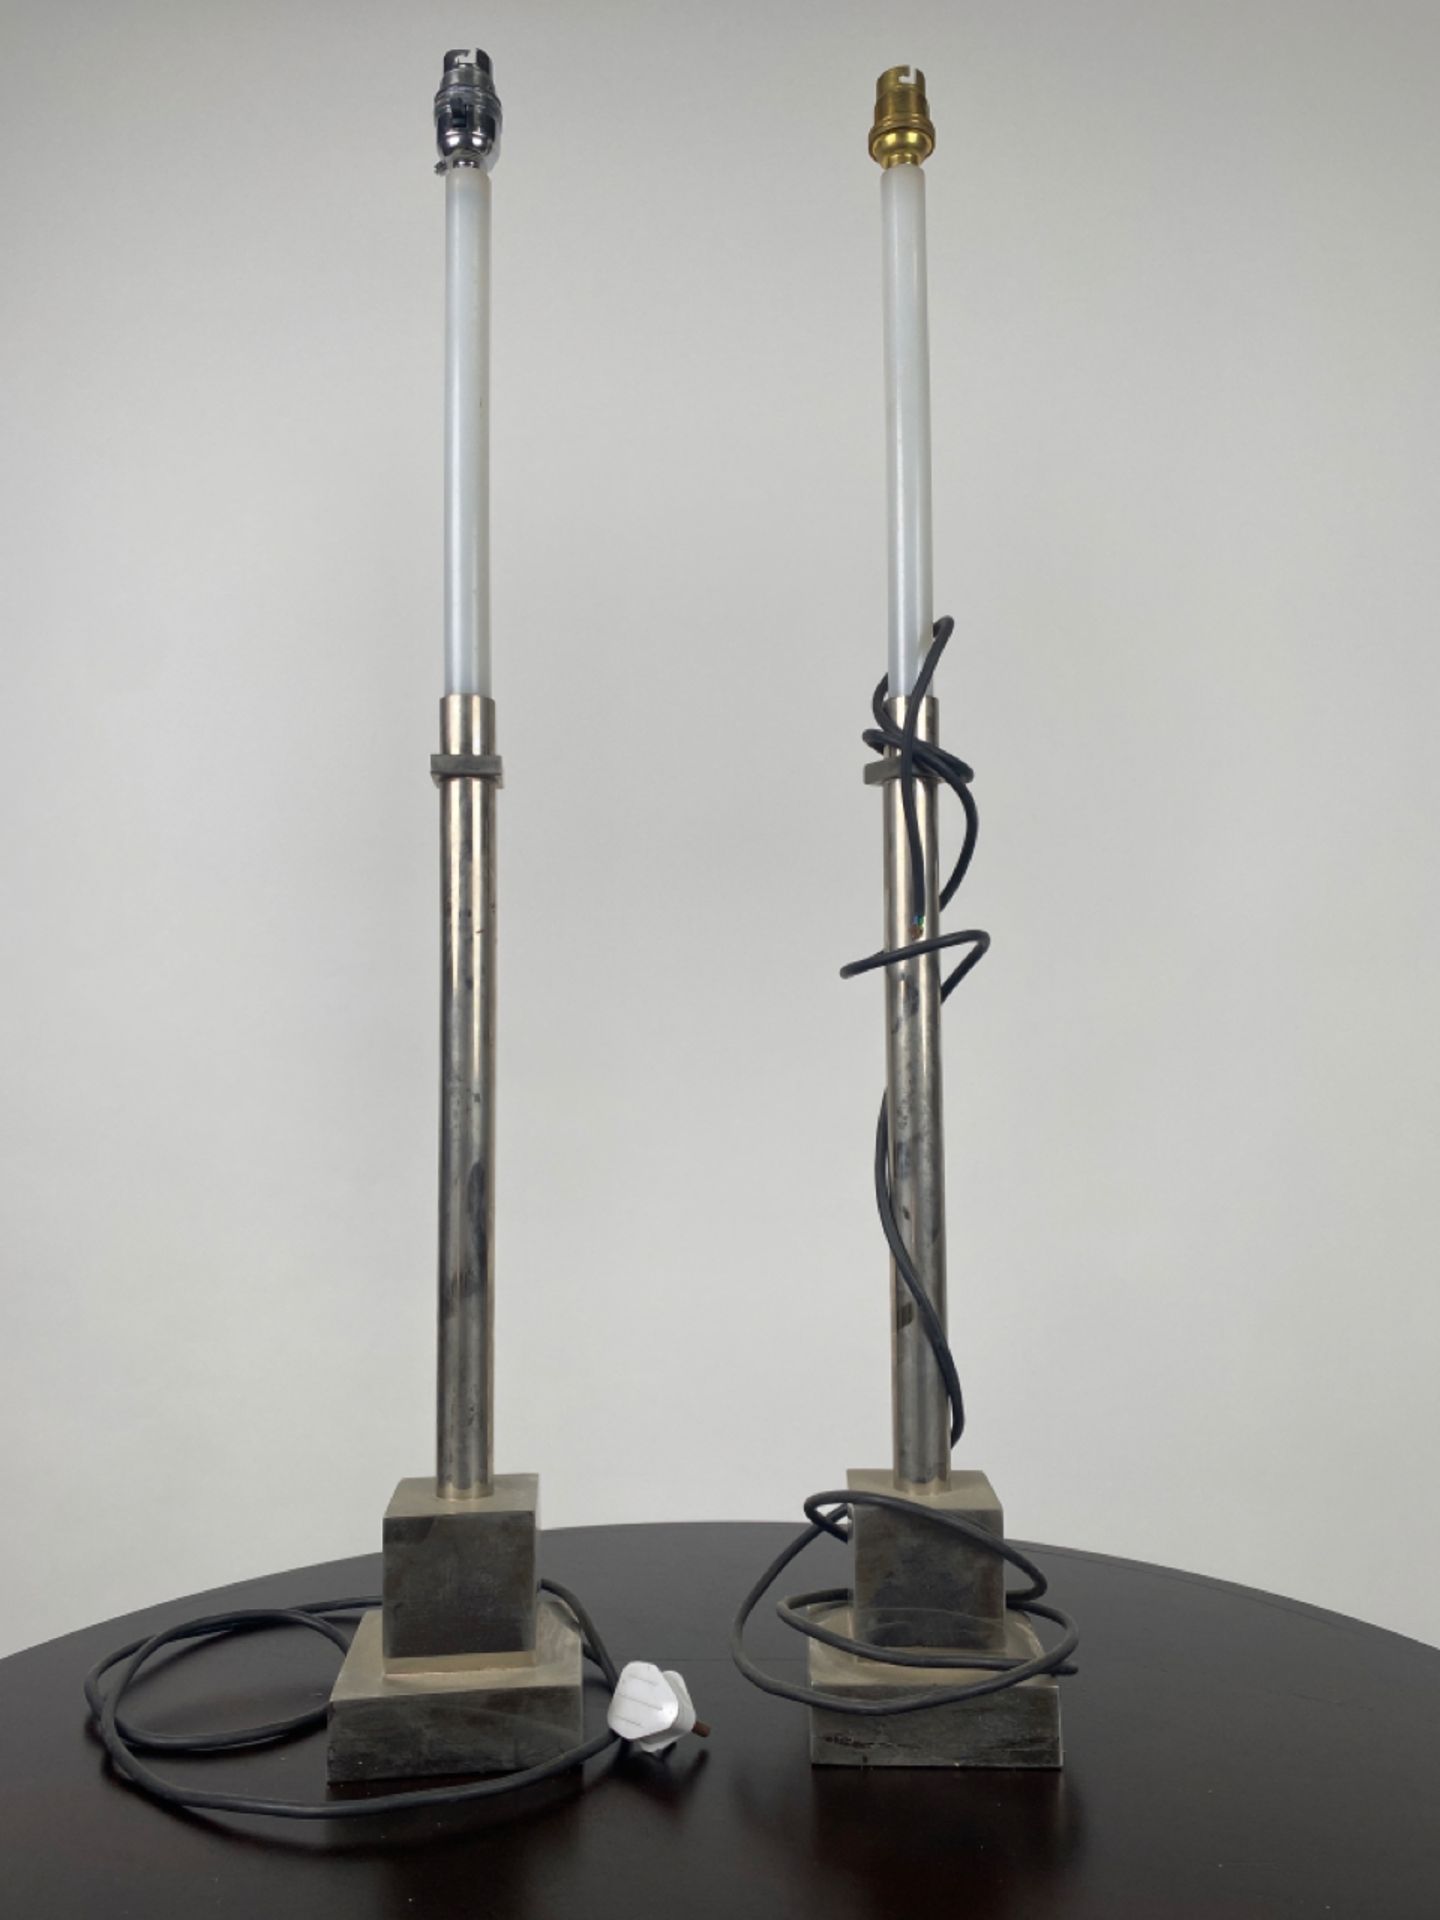 Pair of Contemporary Table Lamps - Image 4 of 4